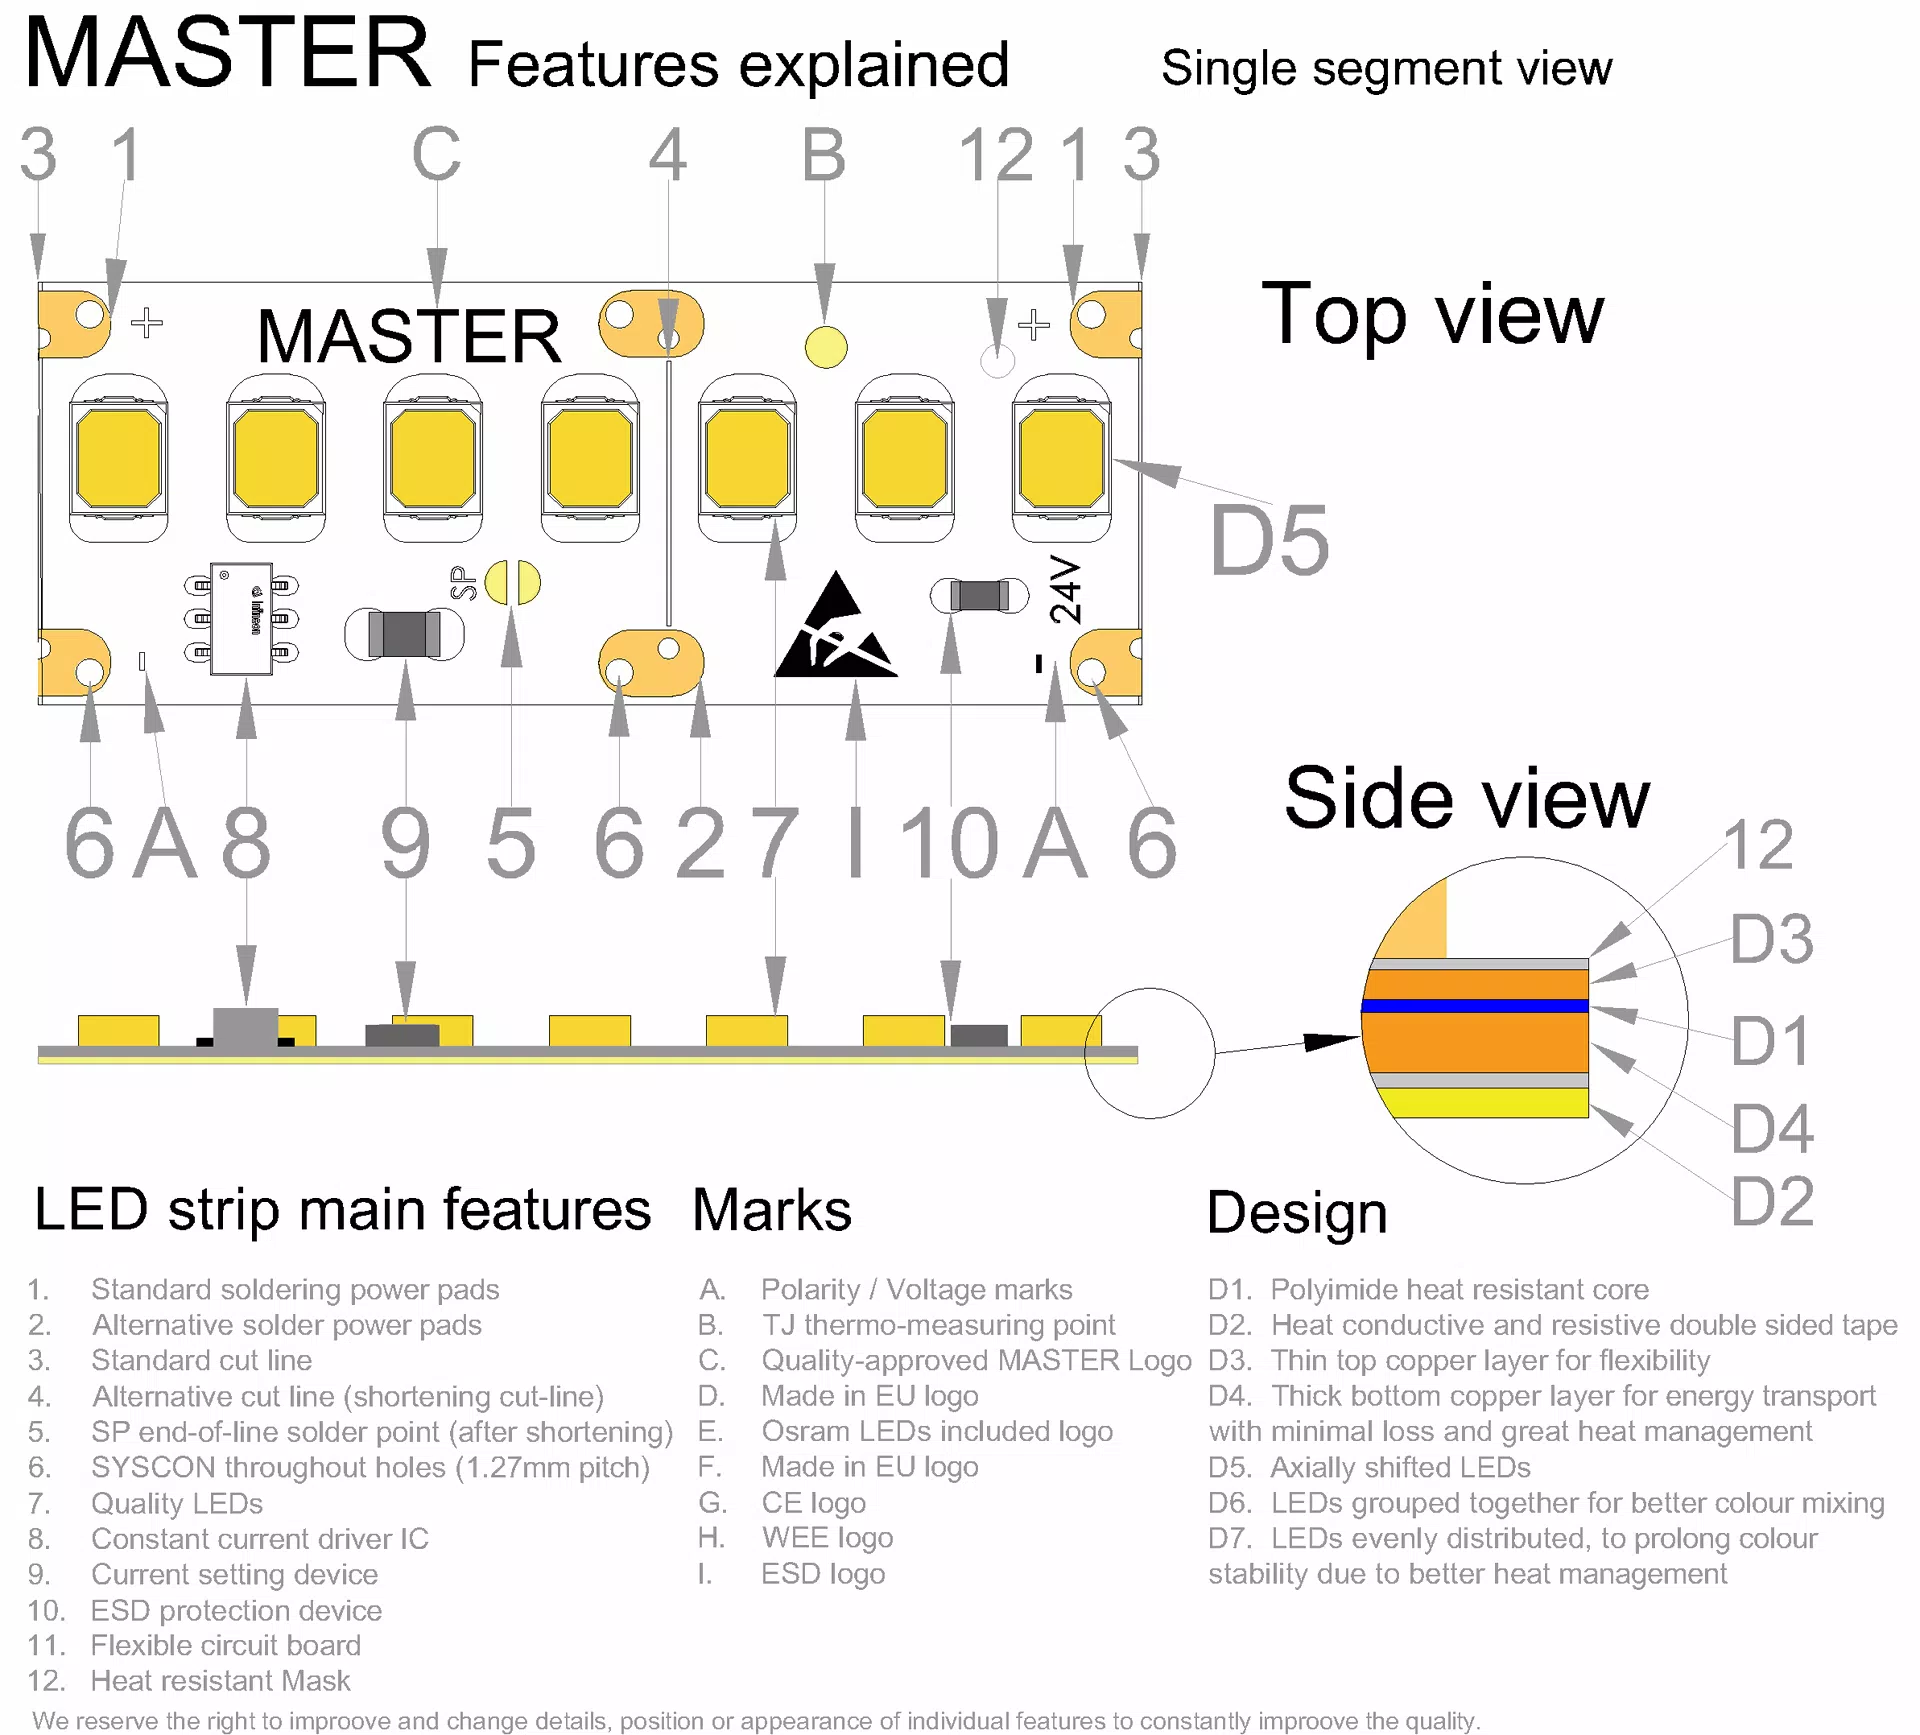 MASTER HD-POWER LED strip segment drawing with all features explained